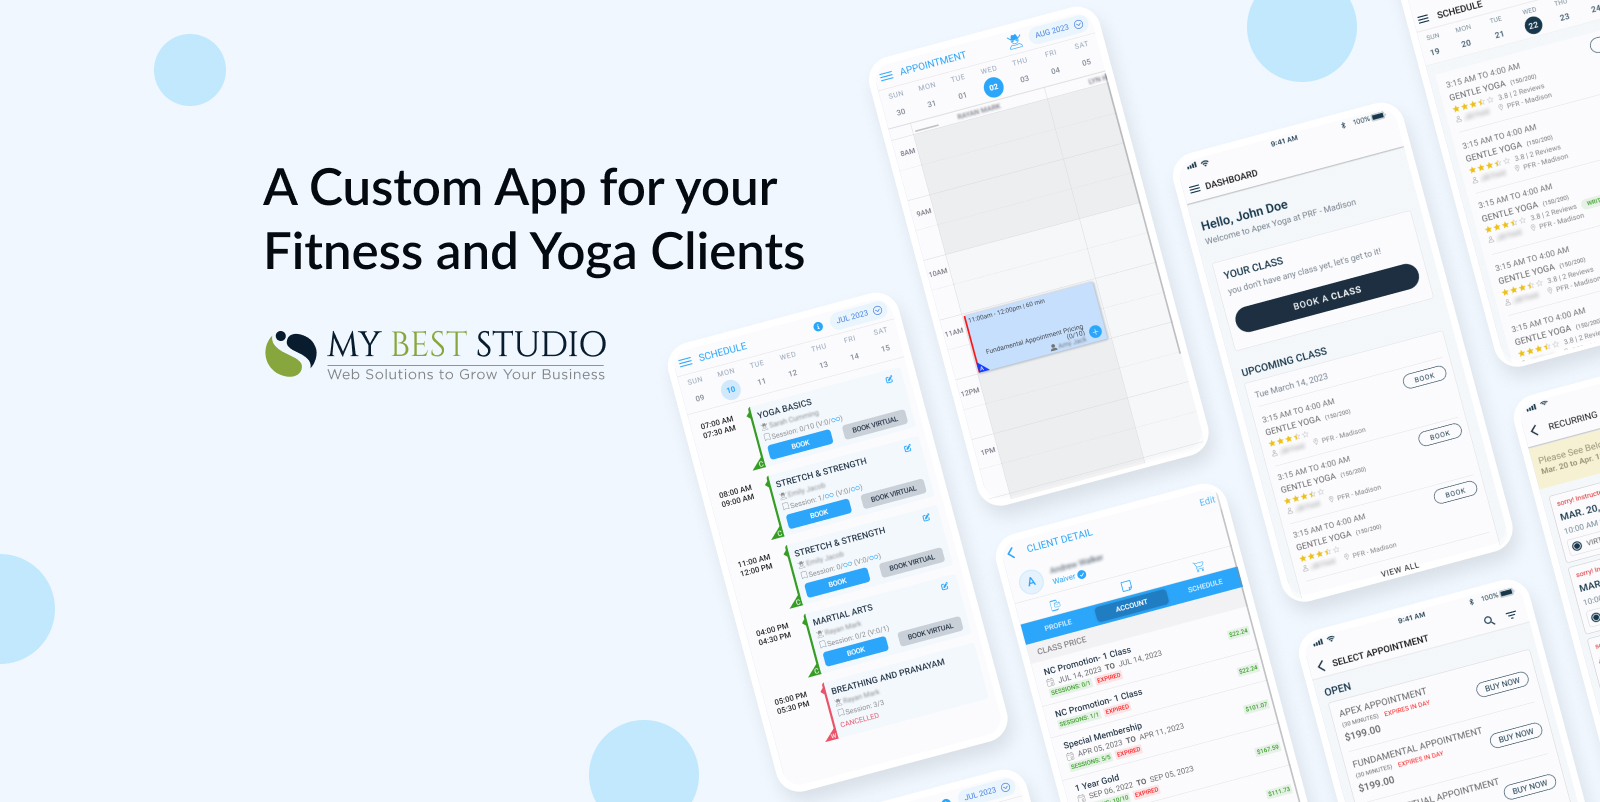 A Custom App for your Fitness and Yoga Clients